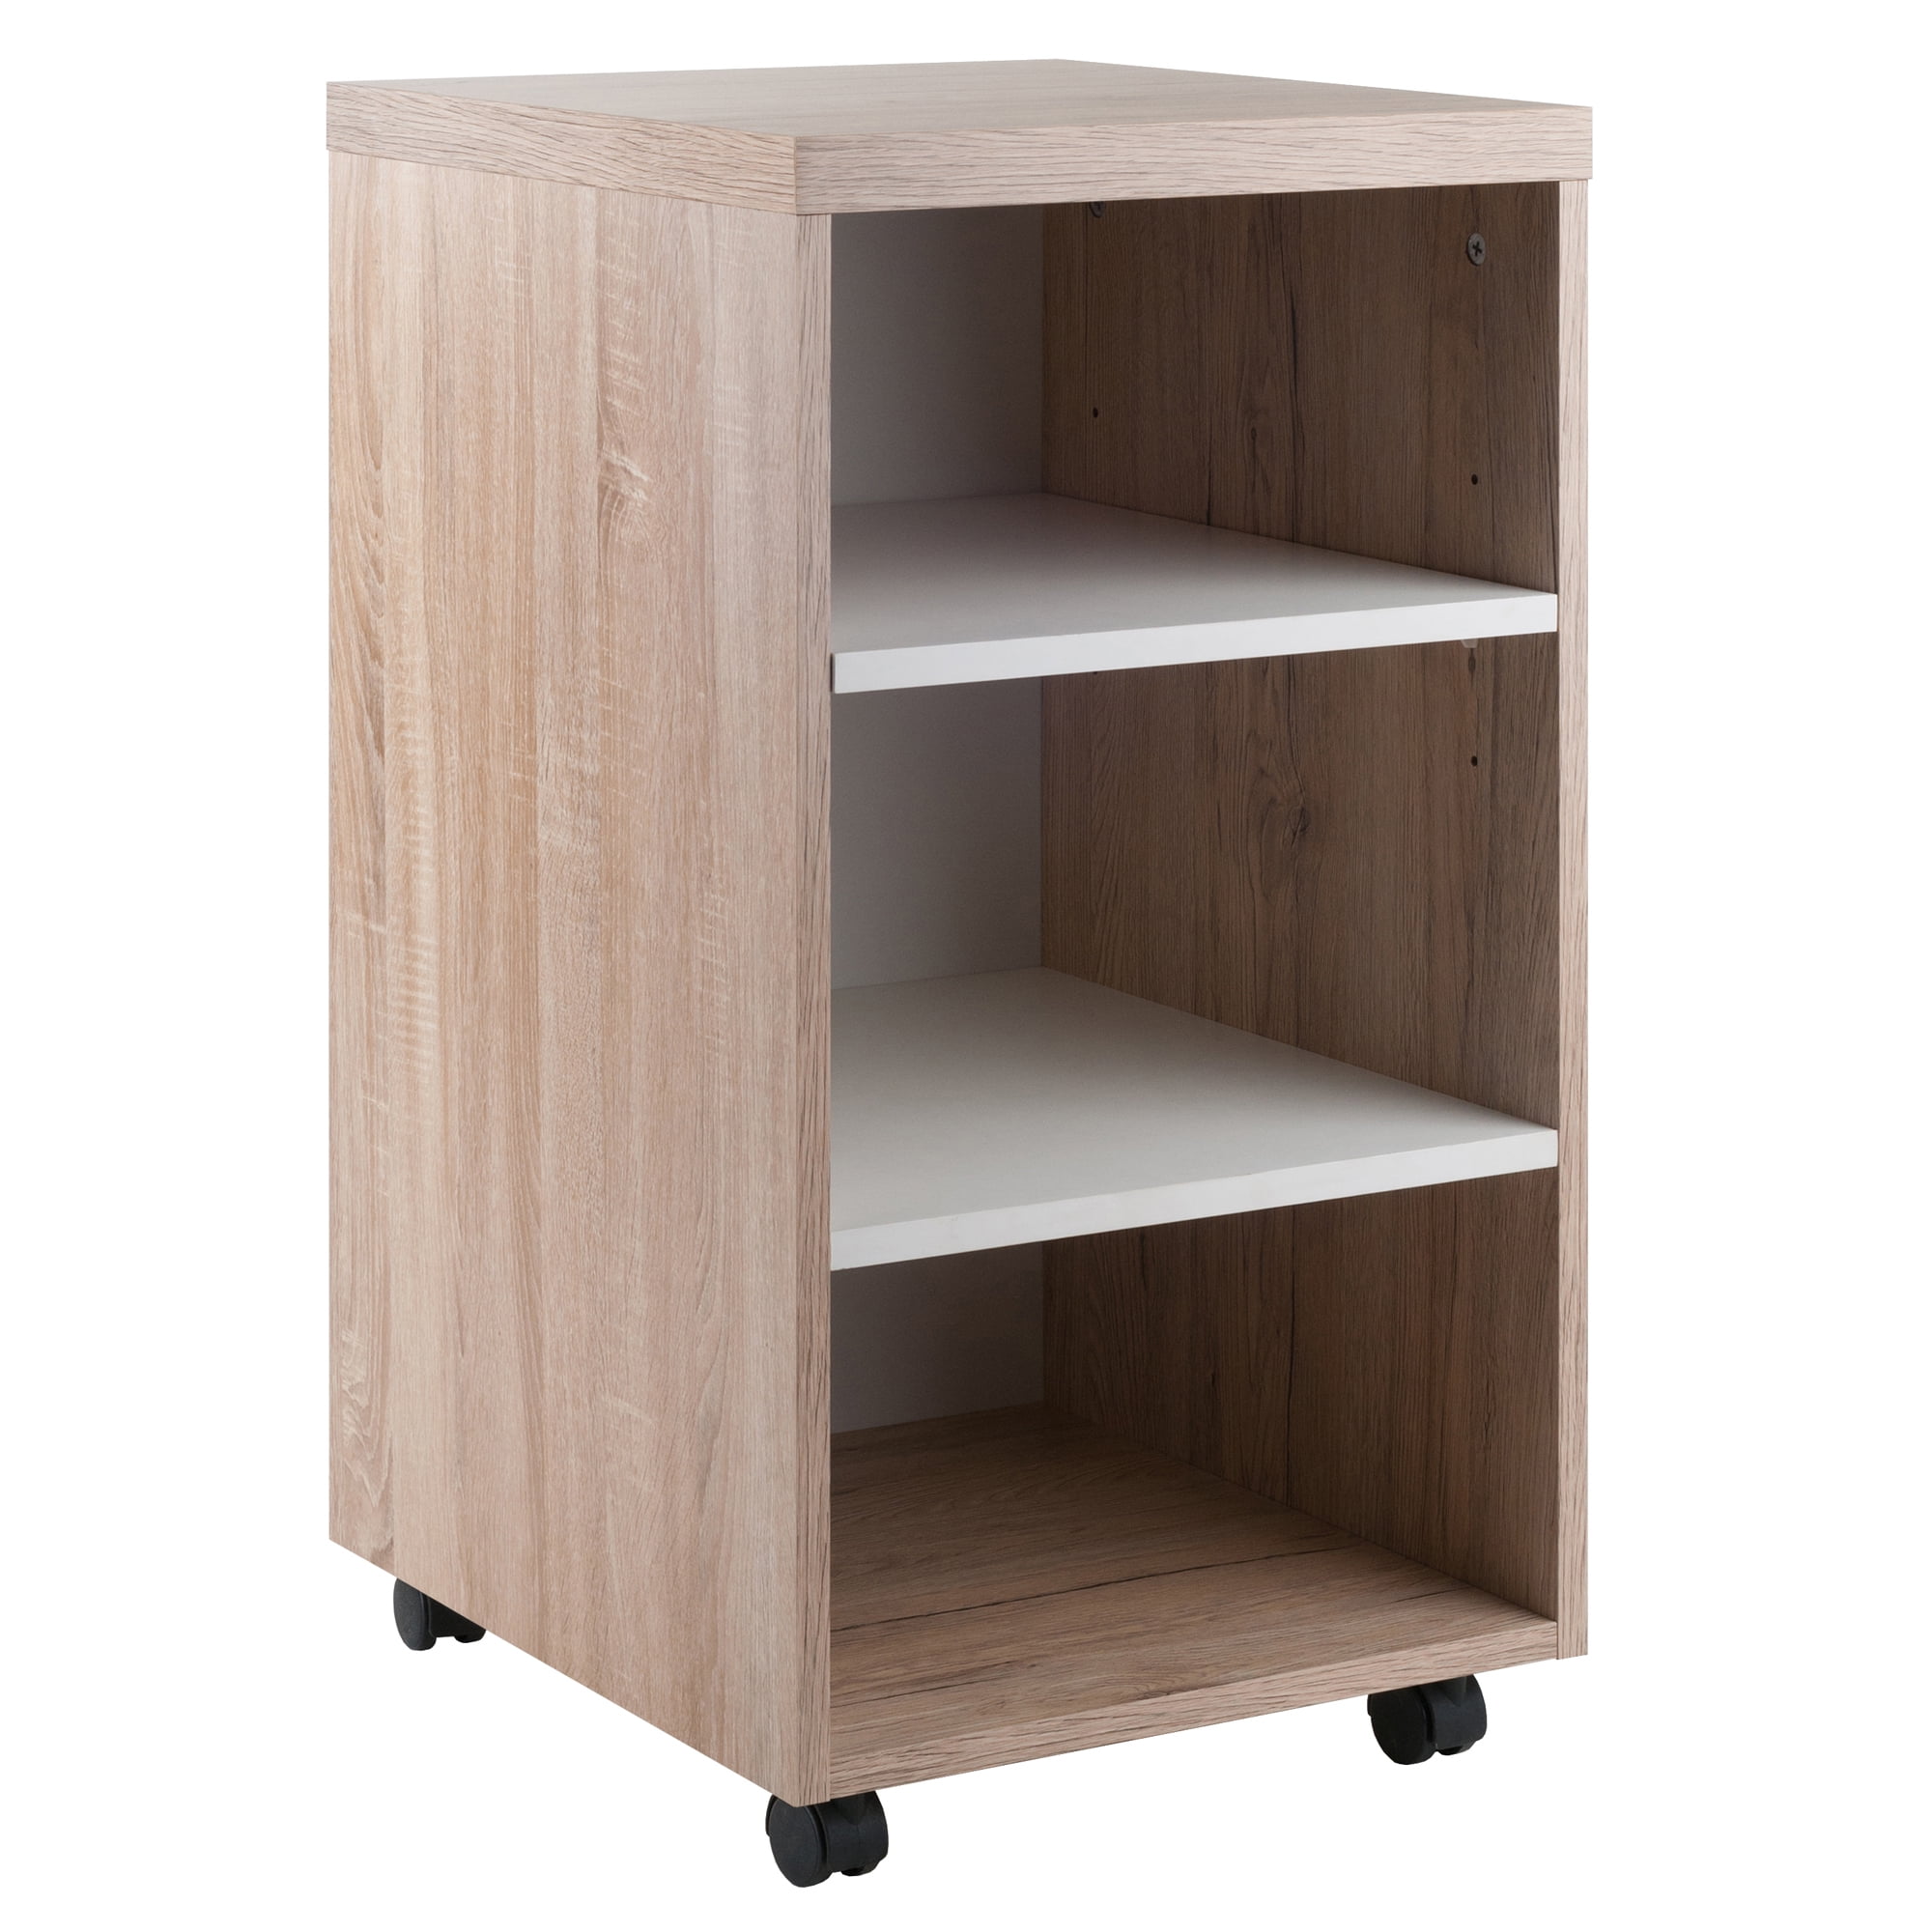 Winsome Wood Kenner Open Shelves, Two Tone Shelves